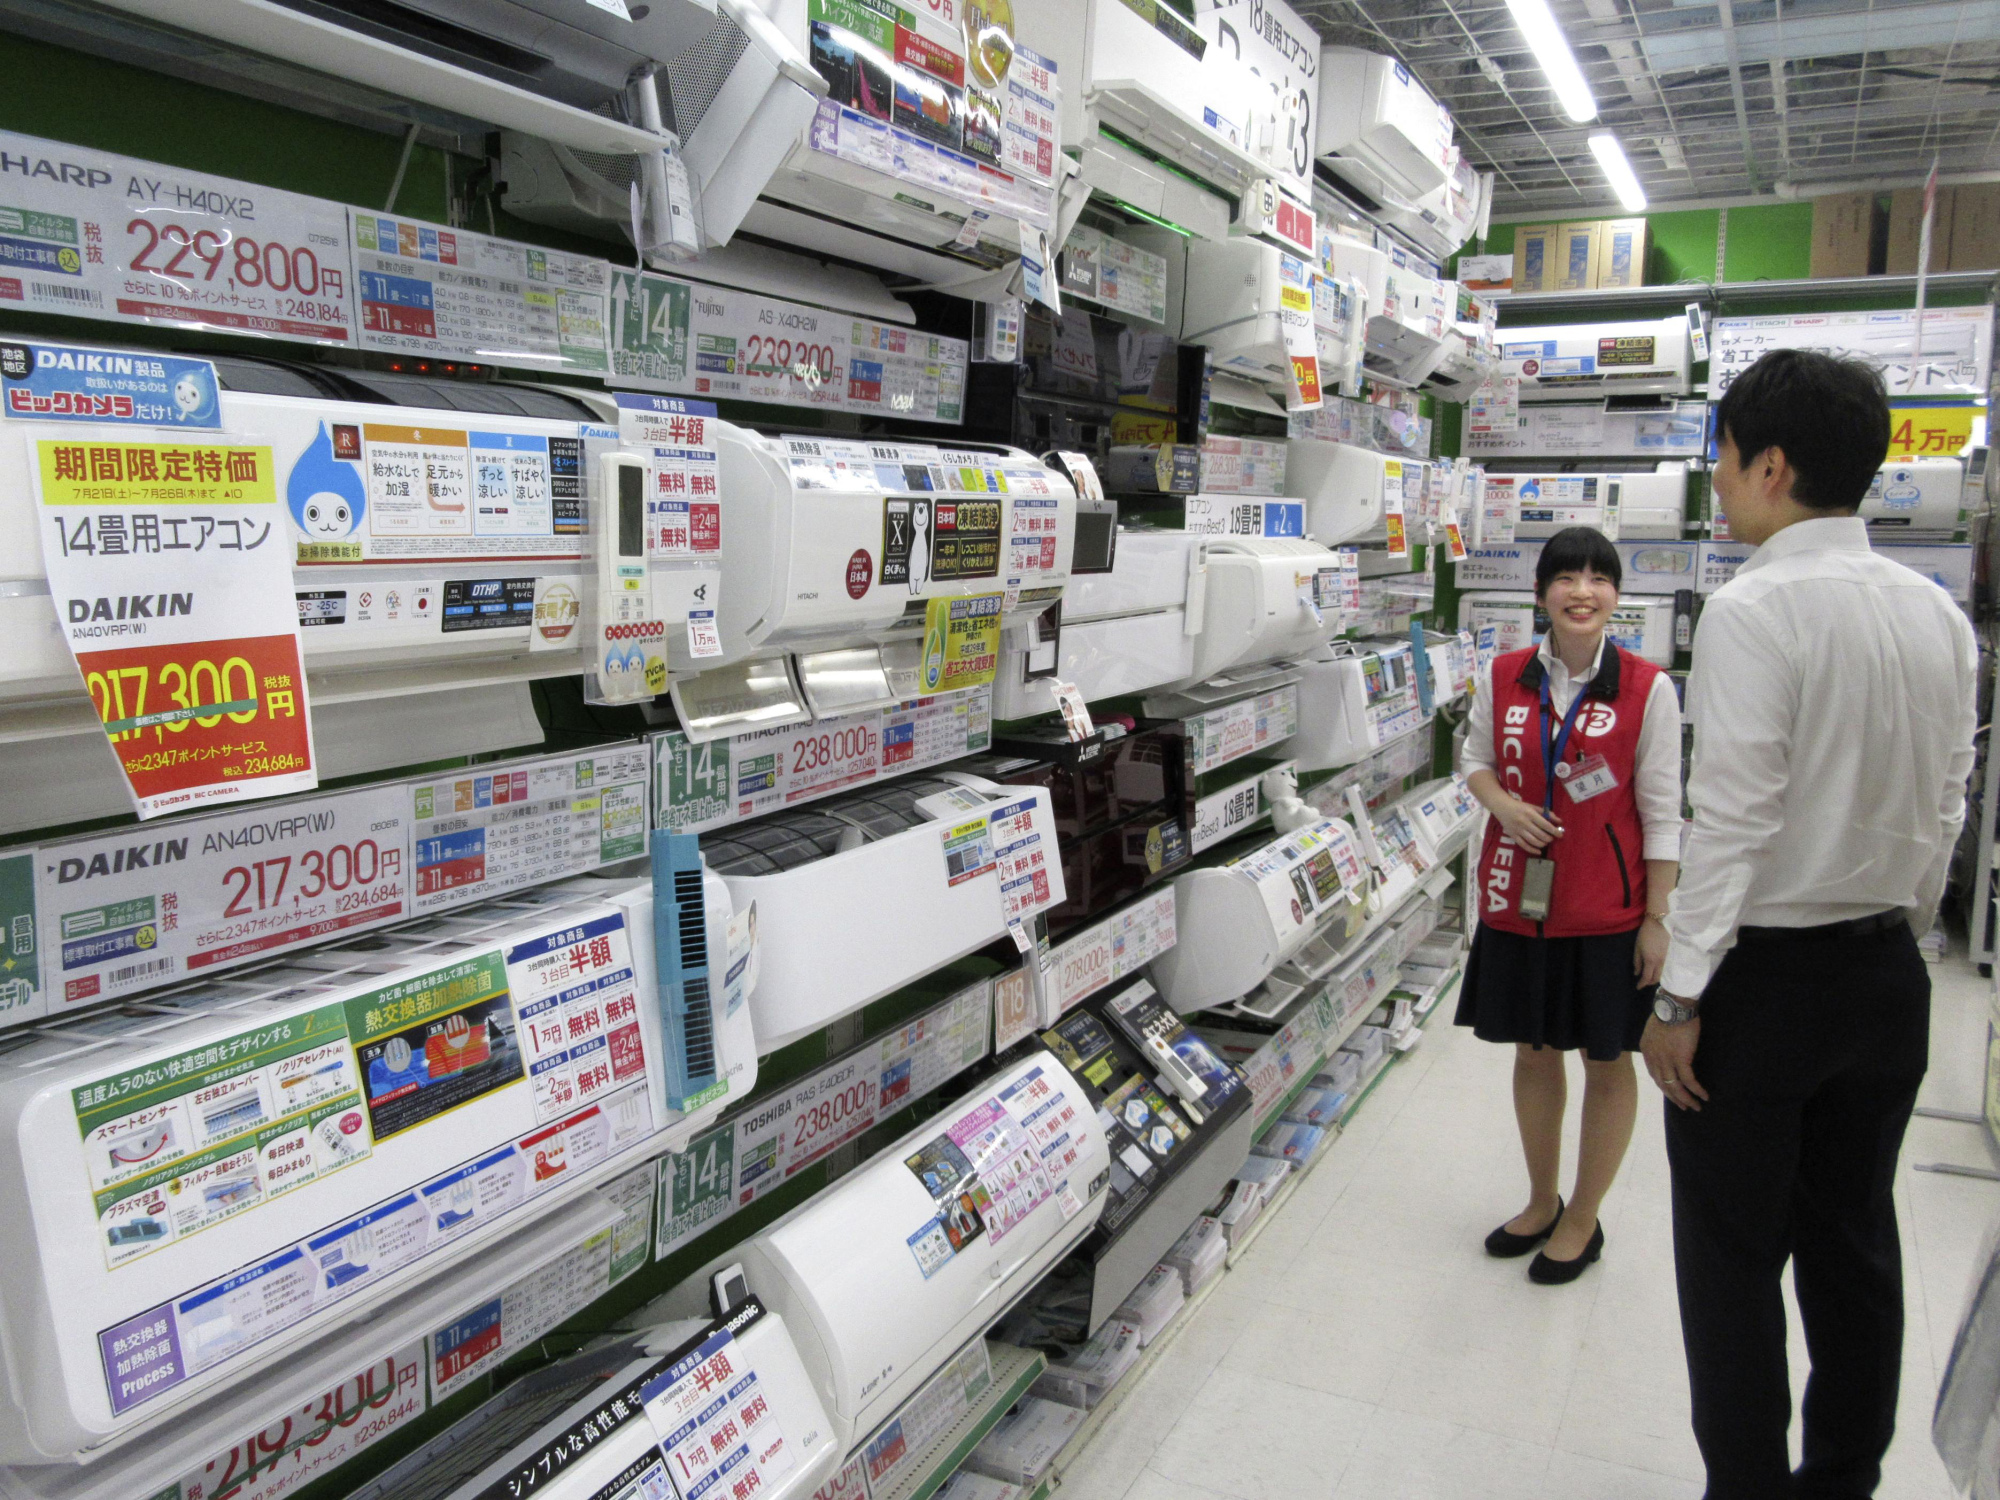 Japan consumers wait months for washing machines, air conditioners - Nikkei  Asia